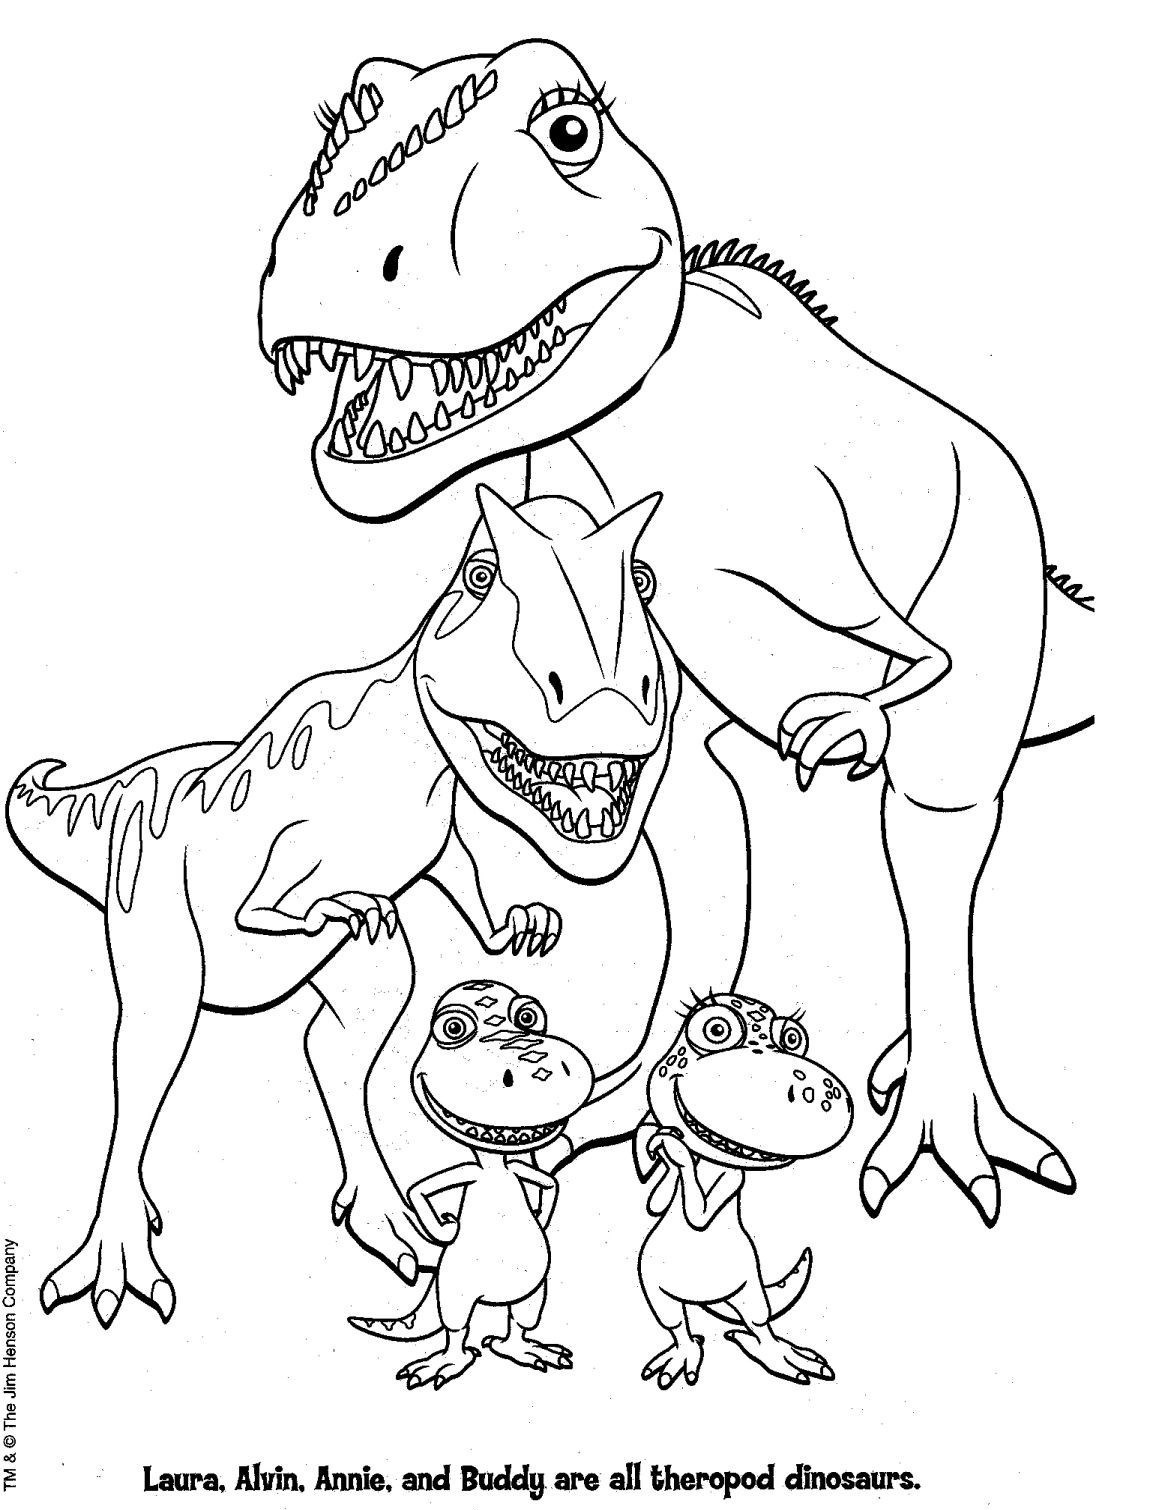 Coloring Pages : Printable Dinosaur Coloring Pages Dinosaurs - Free Printable Dinosaur Coloring Pages